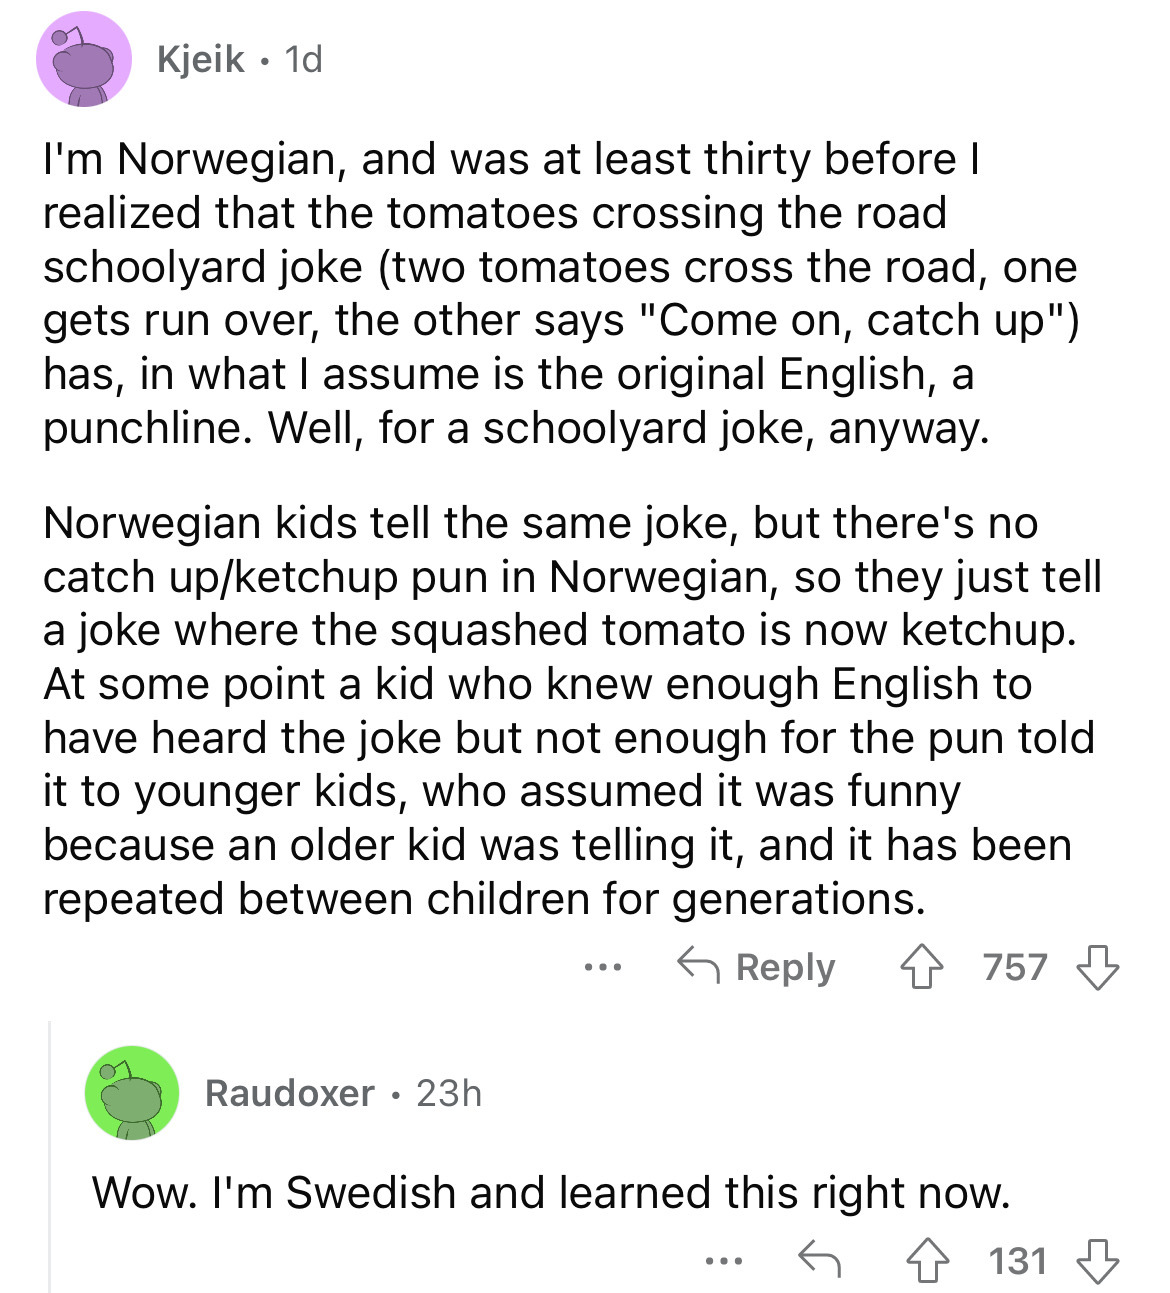 document - Kjeik. 1d I'm Norwegian, and was at least thirty before I realized that the tomatoes crossing the road schoolyard joke two tomatoes cross the road, one gets run over, the other says "Come on, catch up" has, in what I assume is the original Engl